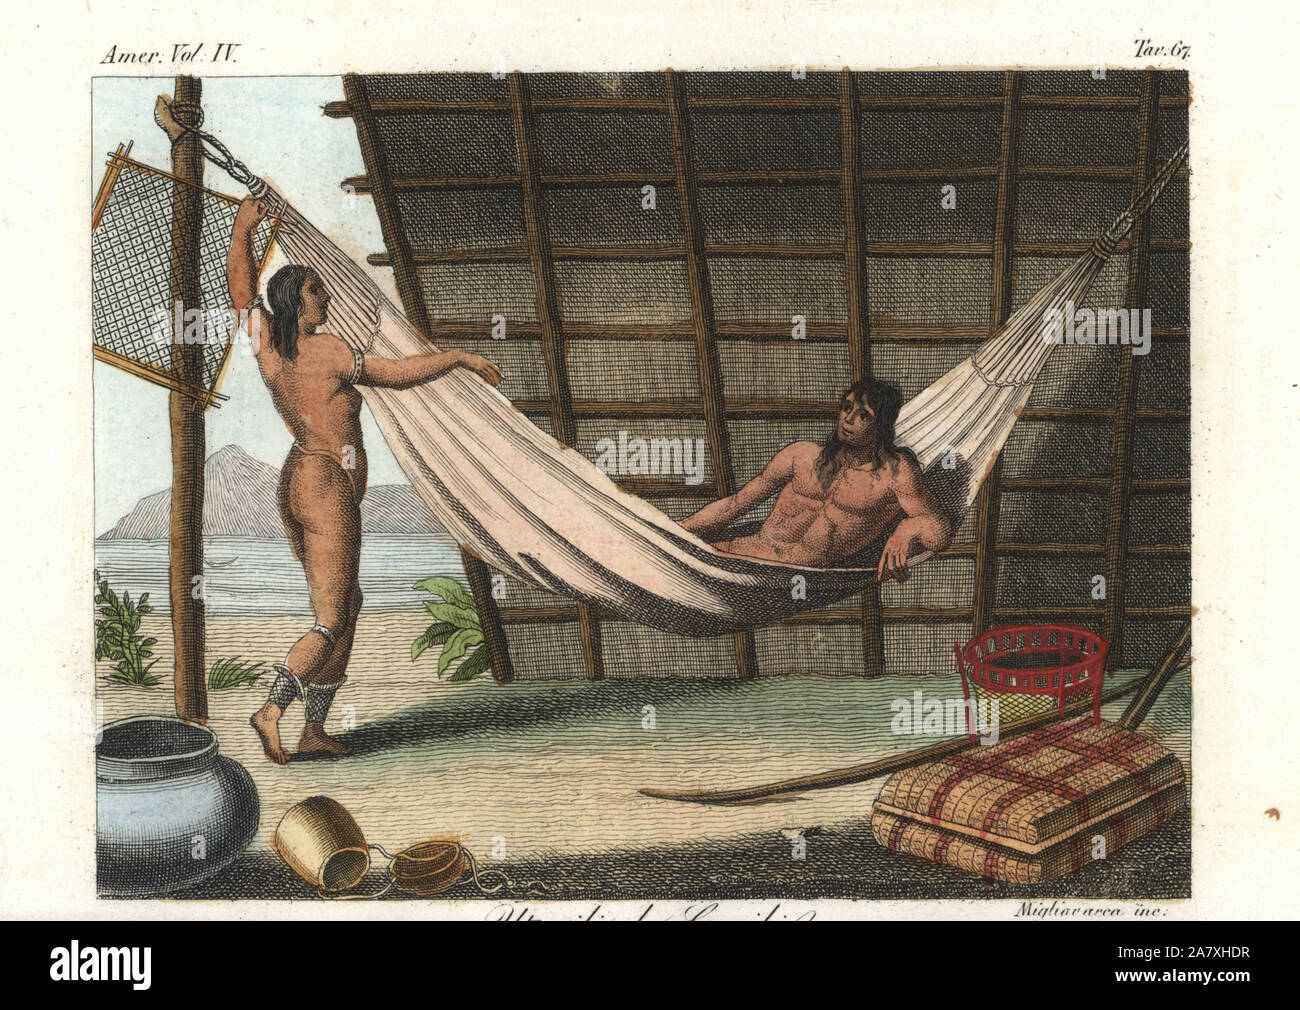 House of the Island Carib or Kalinago people, West Indies. A man relaxes in a hammock under a thatched roof, with rattan basket, rattan table and water jug. Handcoloured copperplate engraving by Migliavacca from Giulio Ferrrario's Costumes Antique and Modern of All Peoples (Il Costume Antico e Moderno di Tutti i Popoli), Florence, 1842. Stock Photo